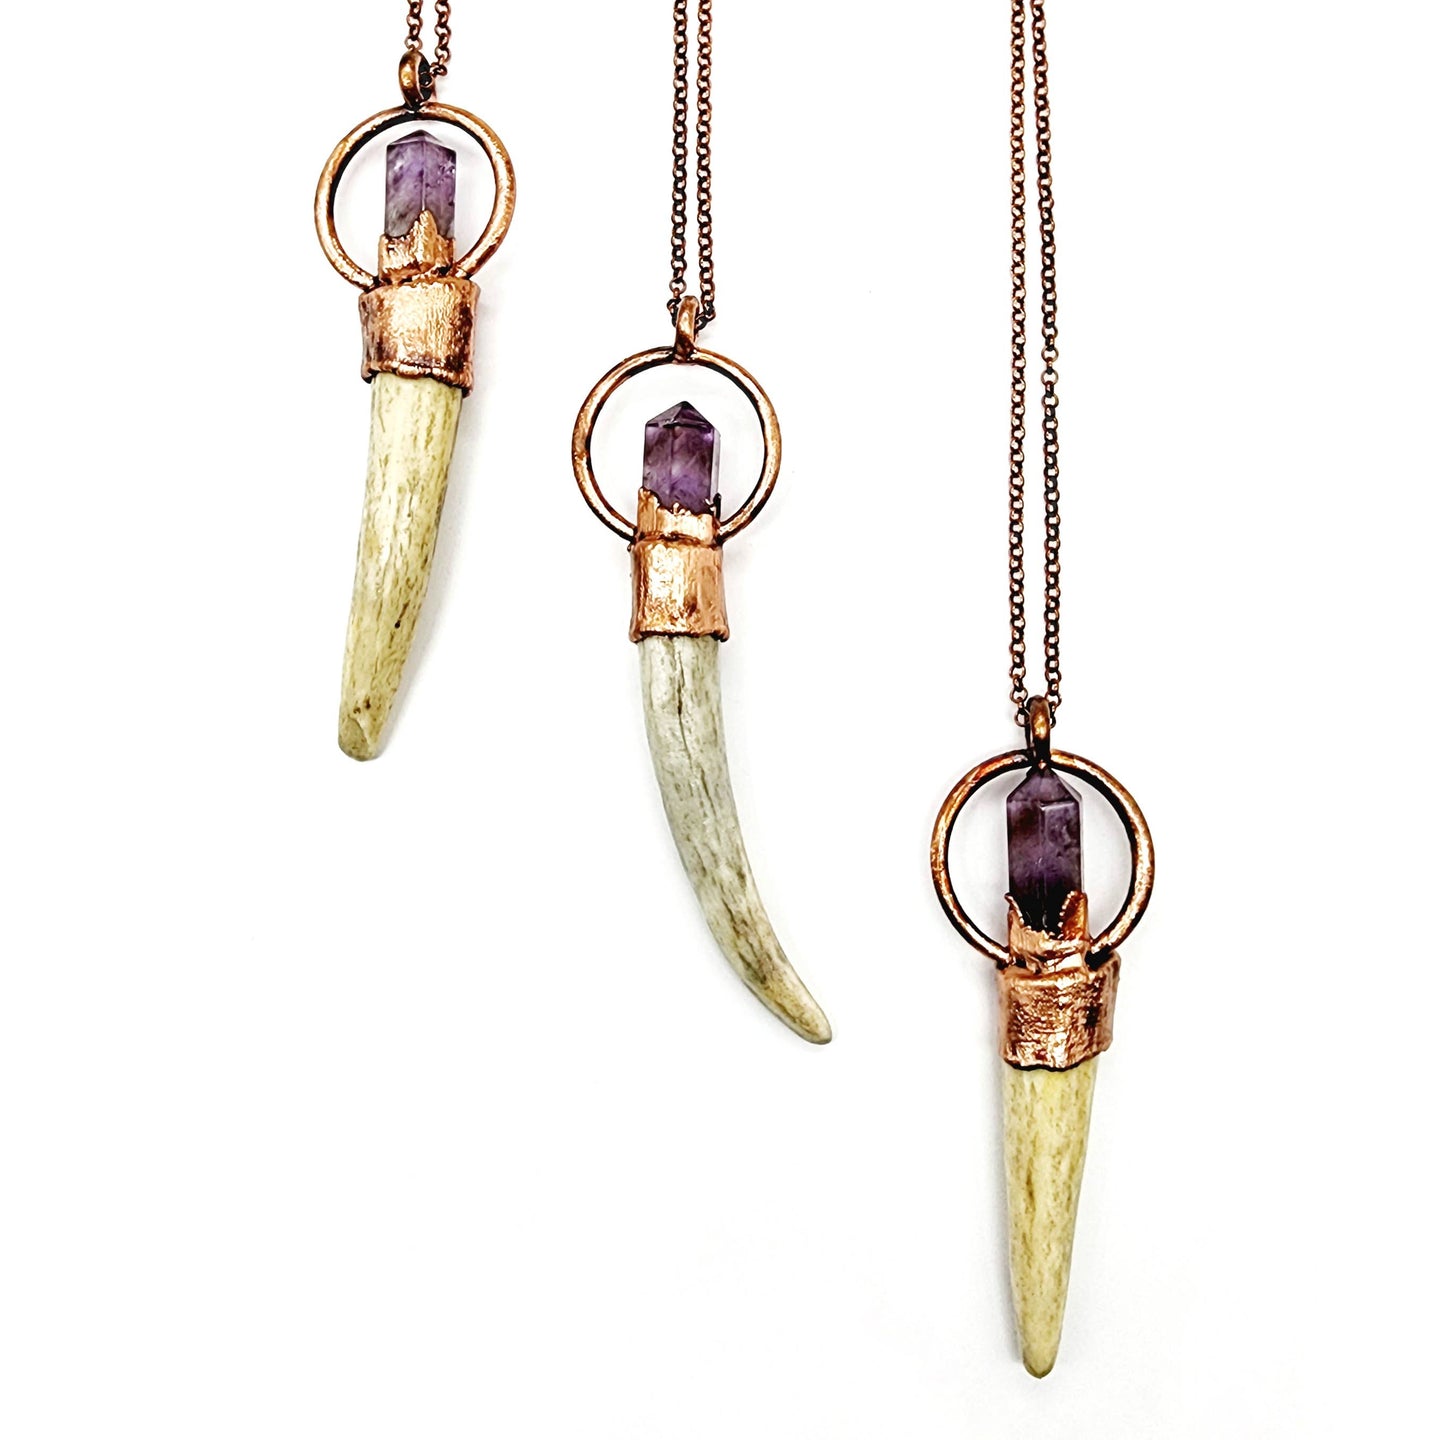 Naturally Shed Antler & Amethyst Talisman Necklace